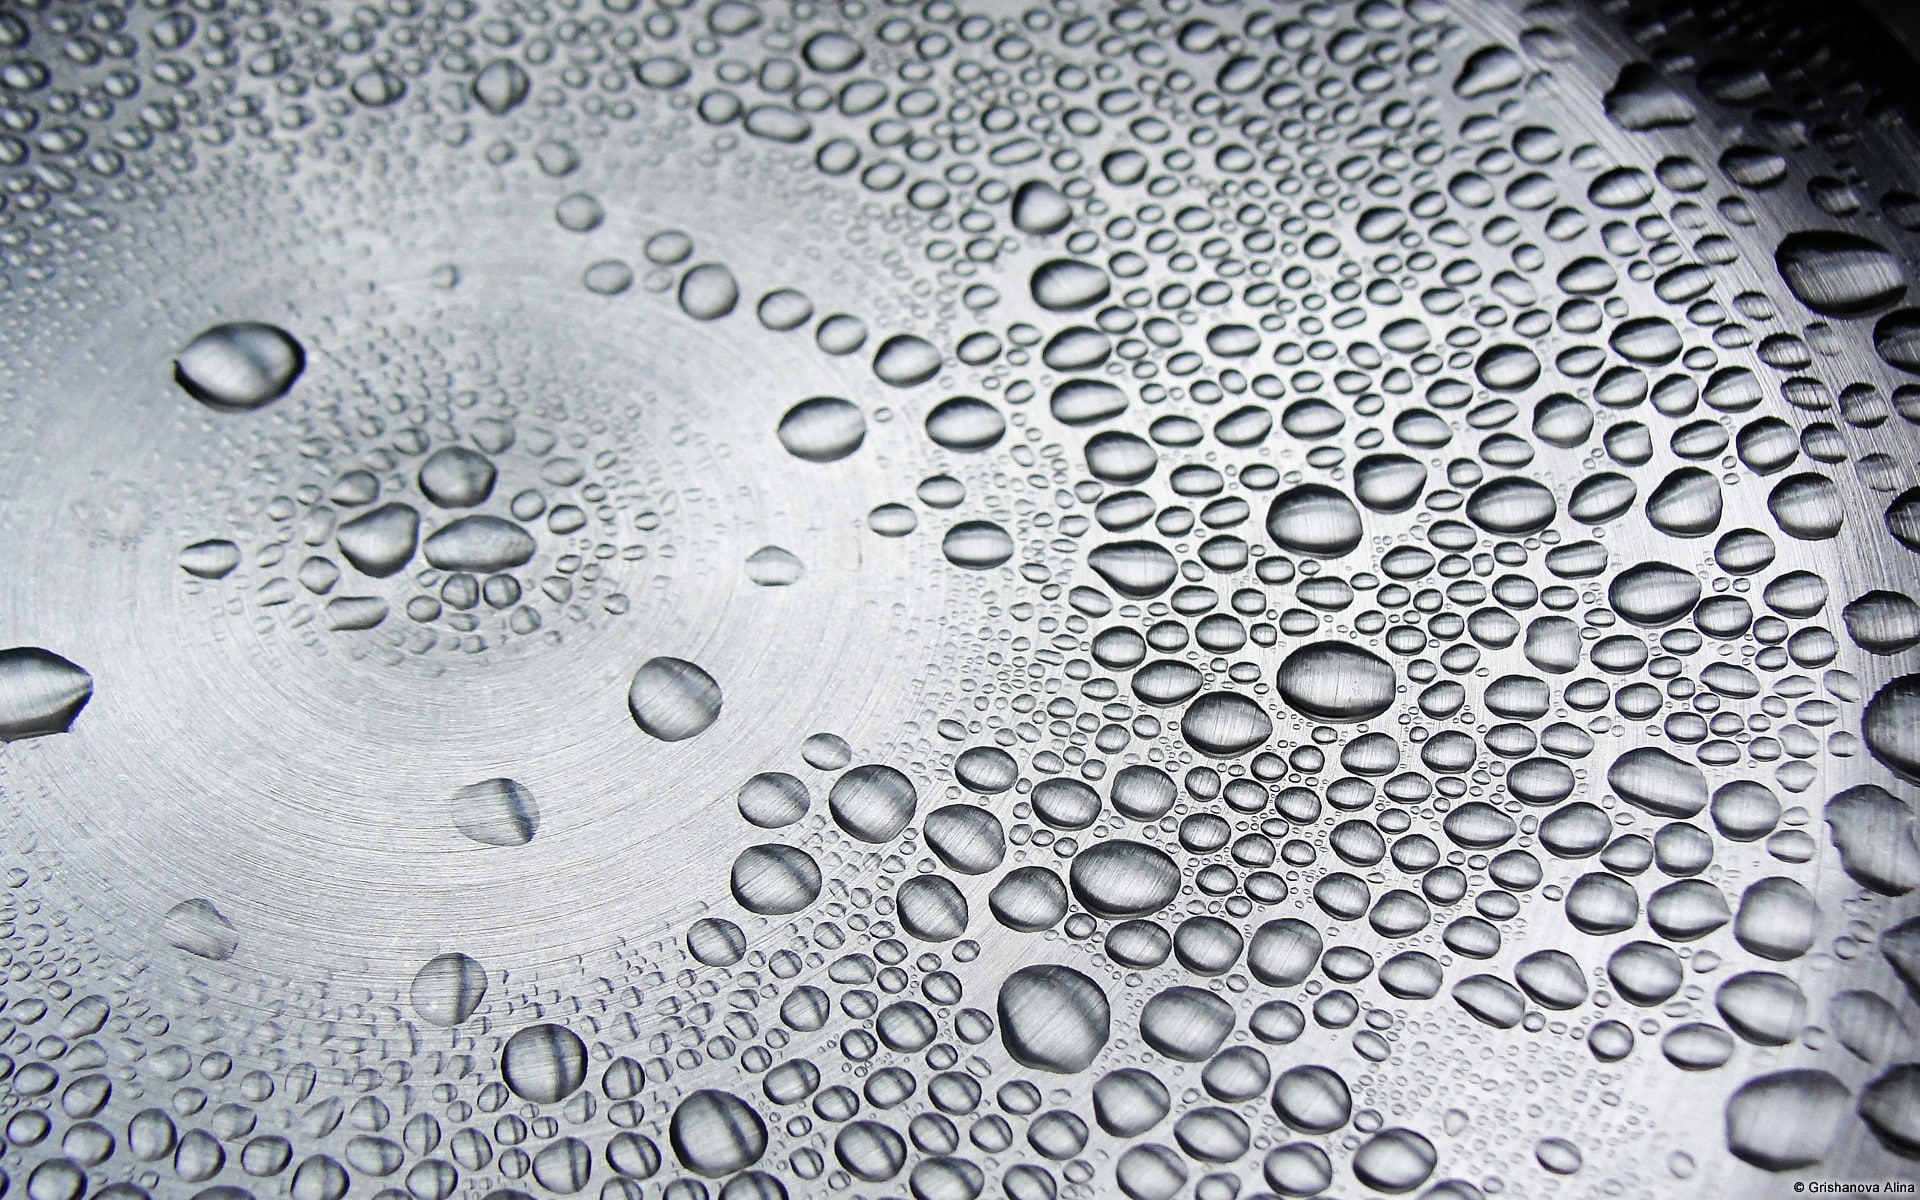 Droplets on Silver Surface-Windows 10 HD Wallpaper, grayscale photography of water dew